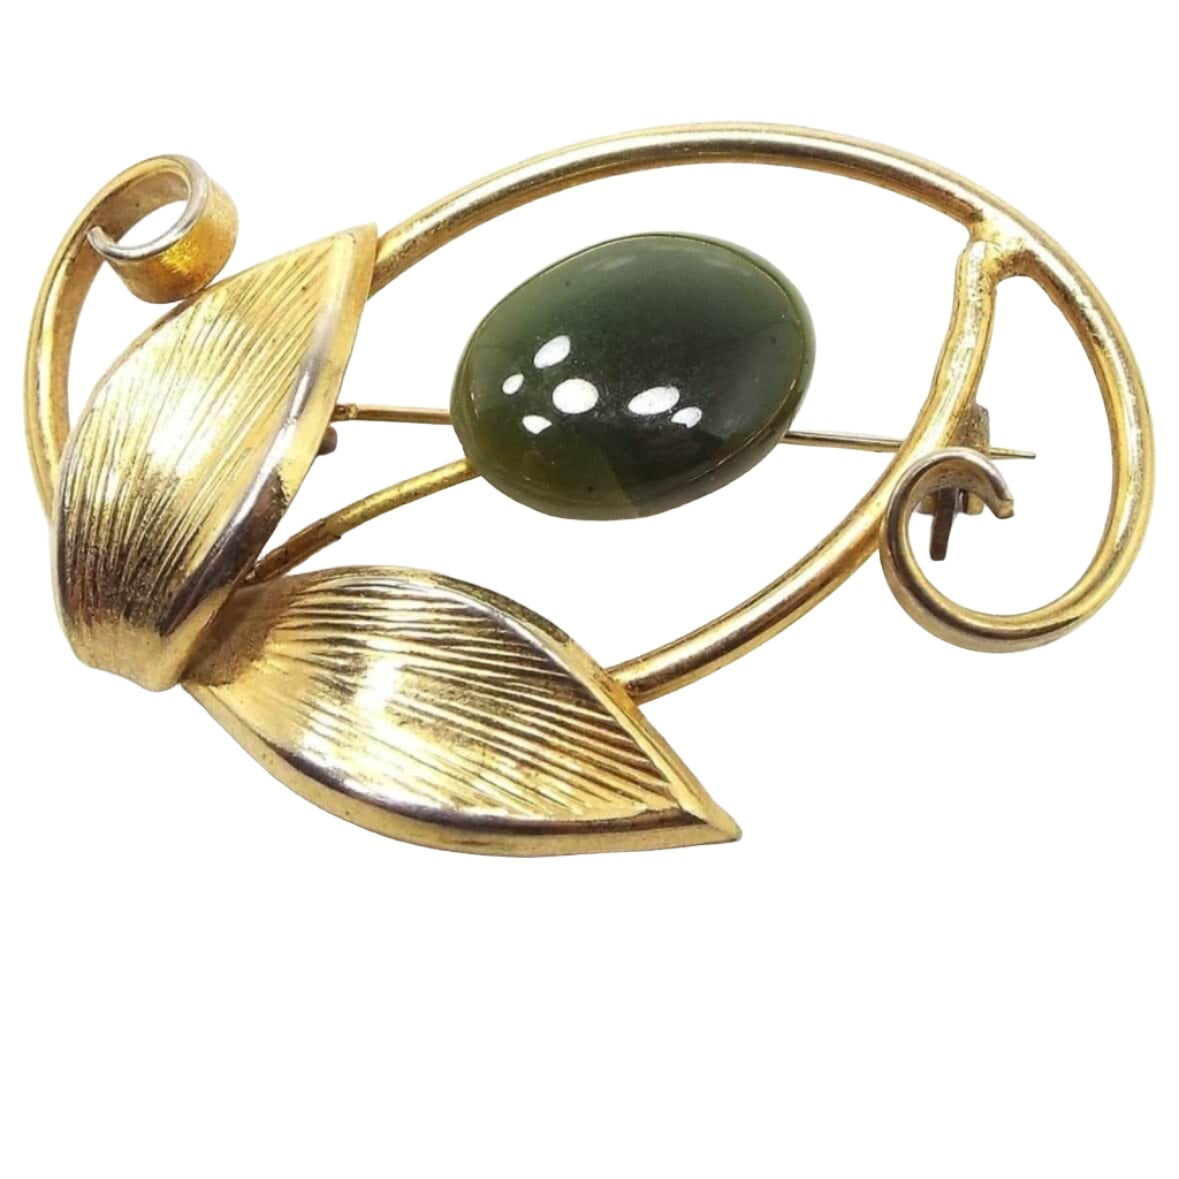 Front view of the retro vintage floral brooch. the metal is gold tone in color. The flower head is a puffy oval green jade gemstone cab. There is a wire stem that goes down to two textured leaves and there are curled areas of metal on each side and around the head of the floor with an open space in between.